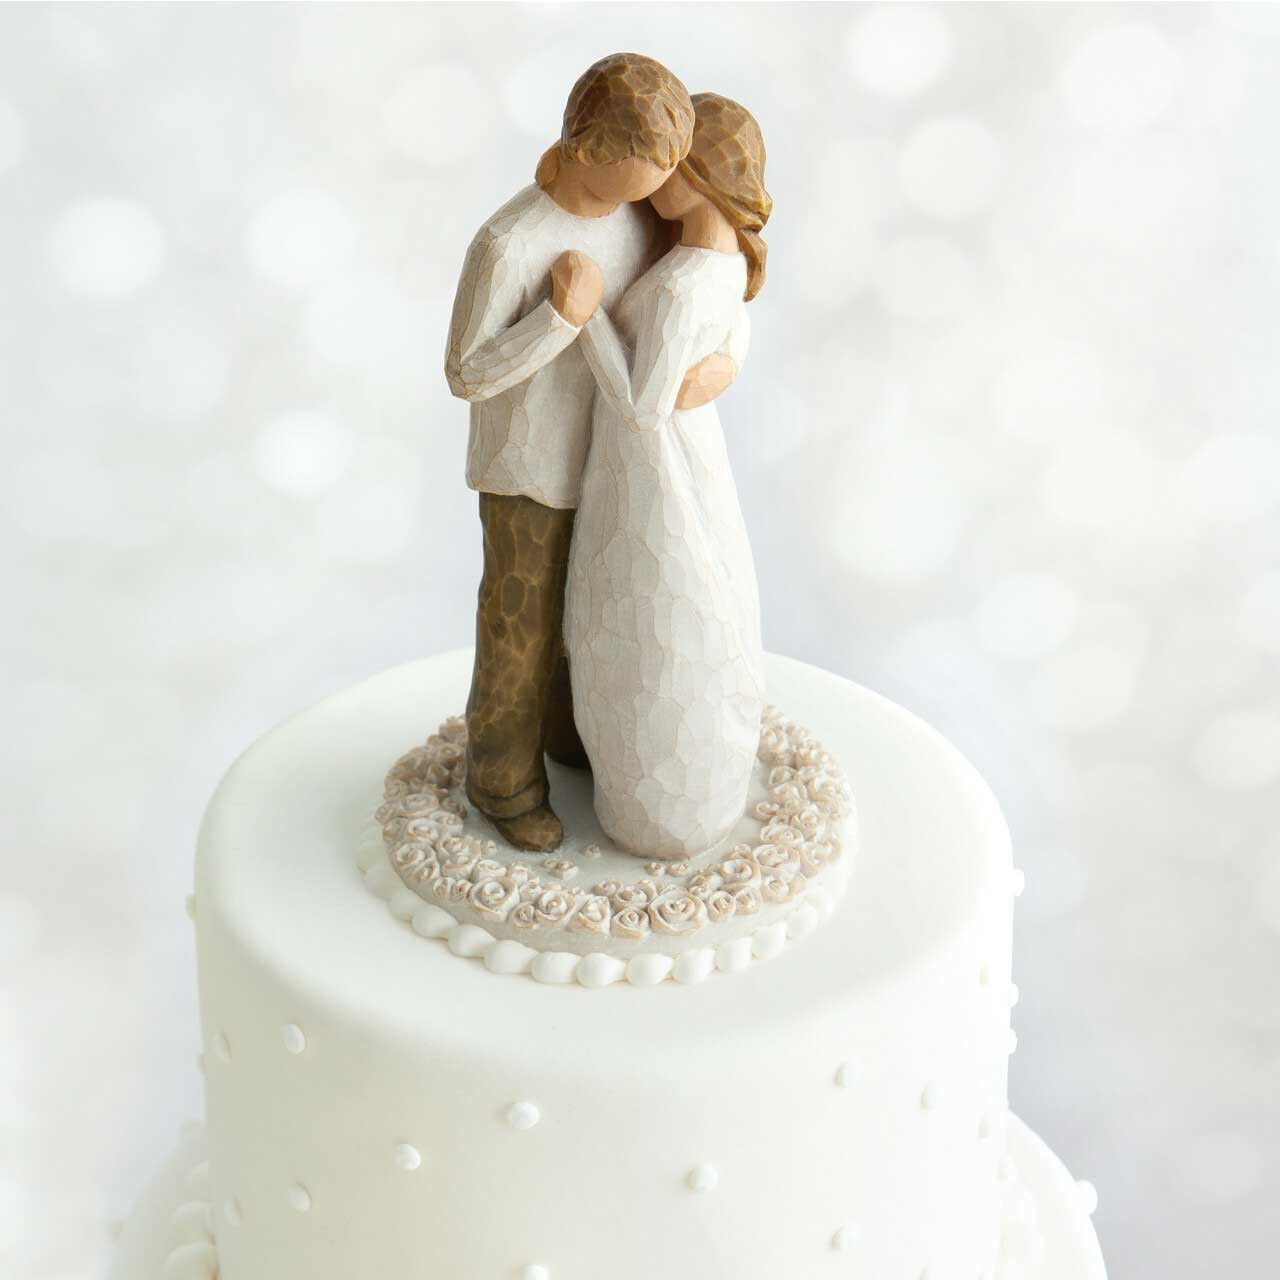 Hold Dear the Promise Cake Topper